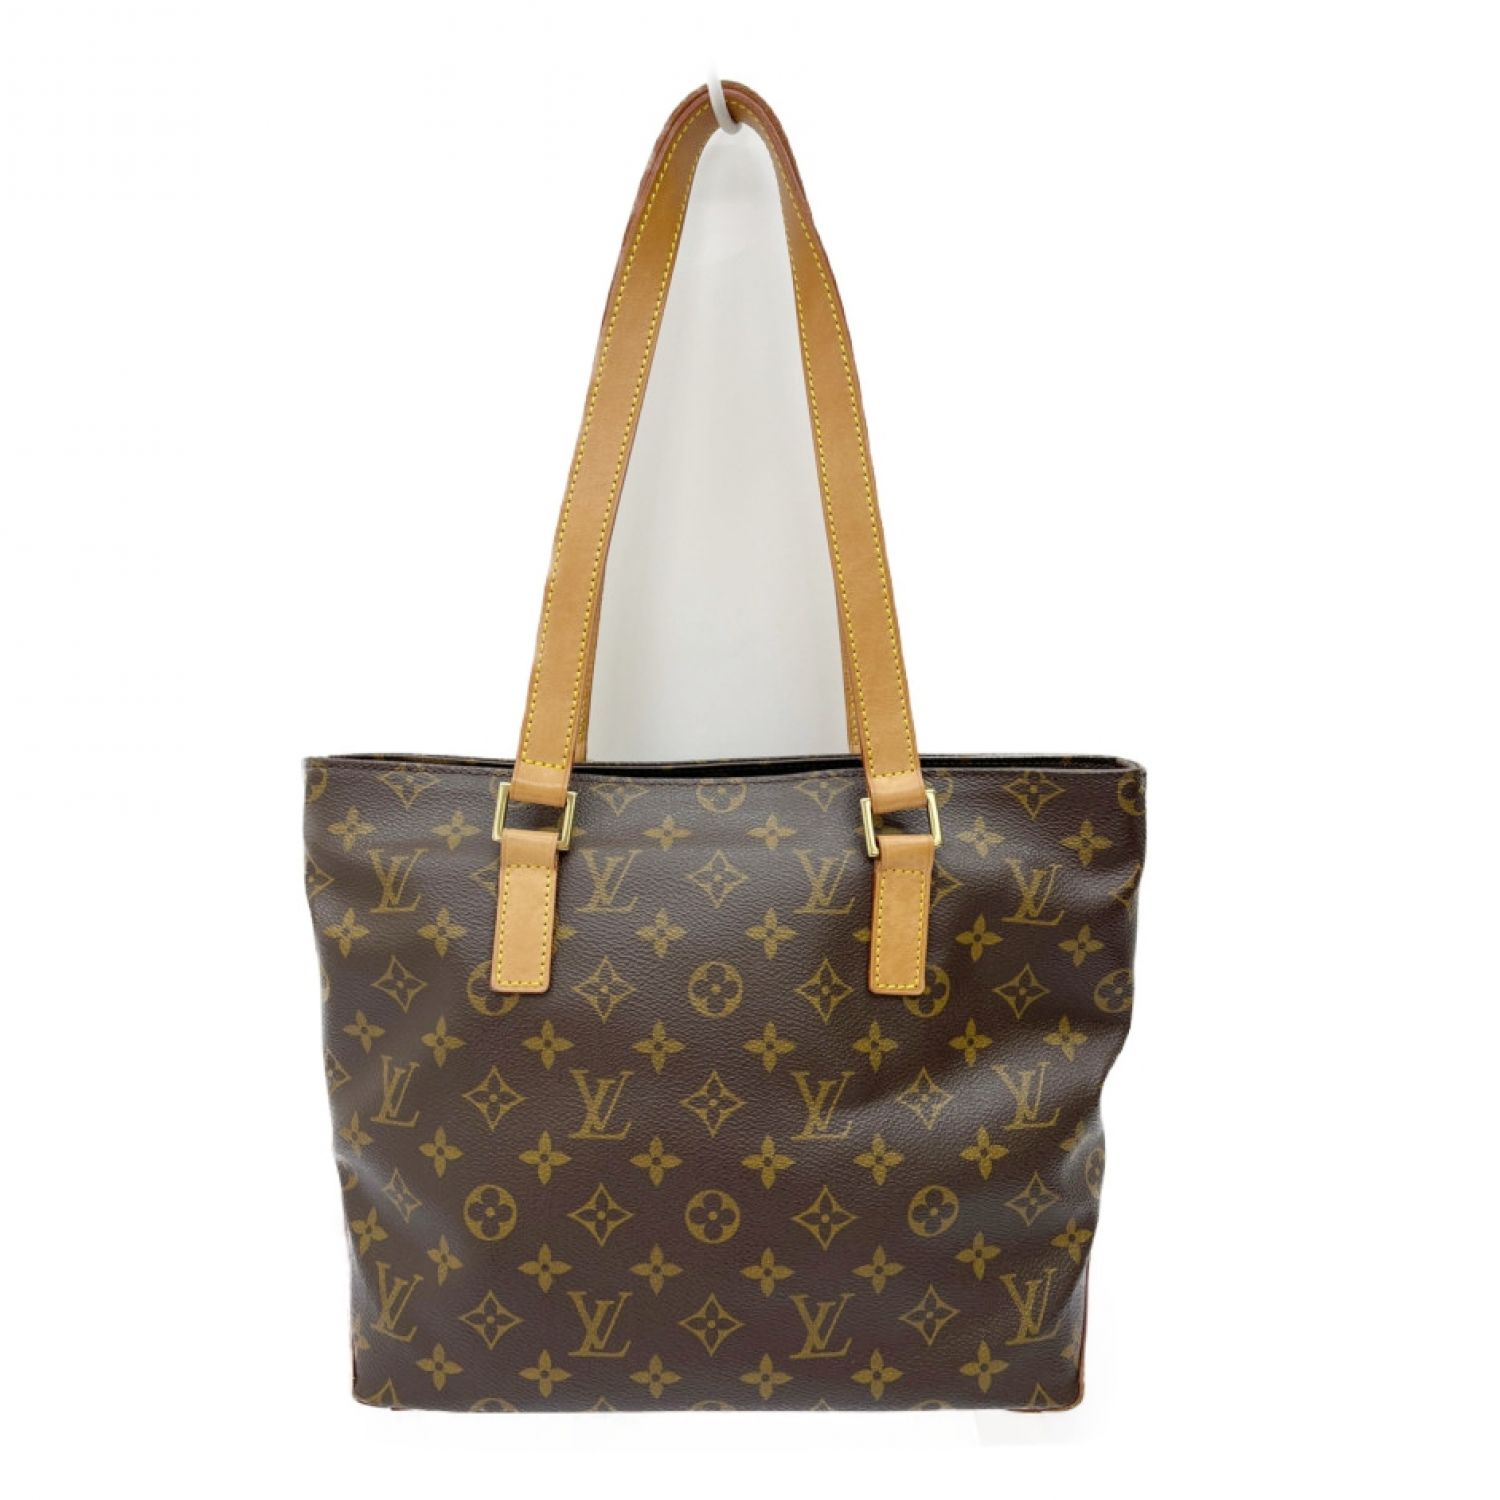 ◇◇LOUIS VUITTON ルイヴィトン バッグ トートバッグ モノグラム